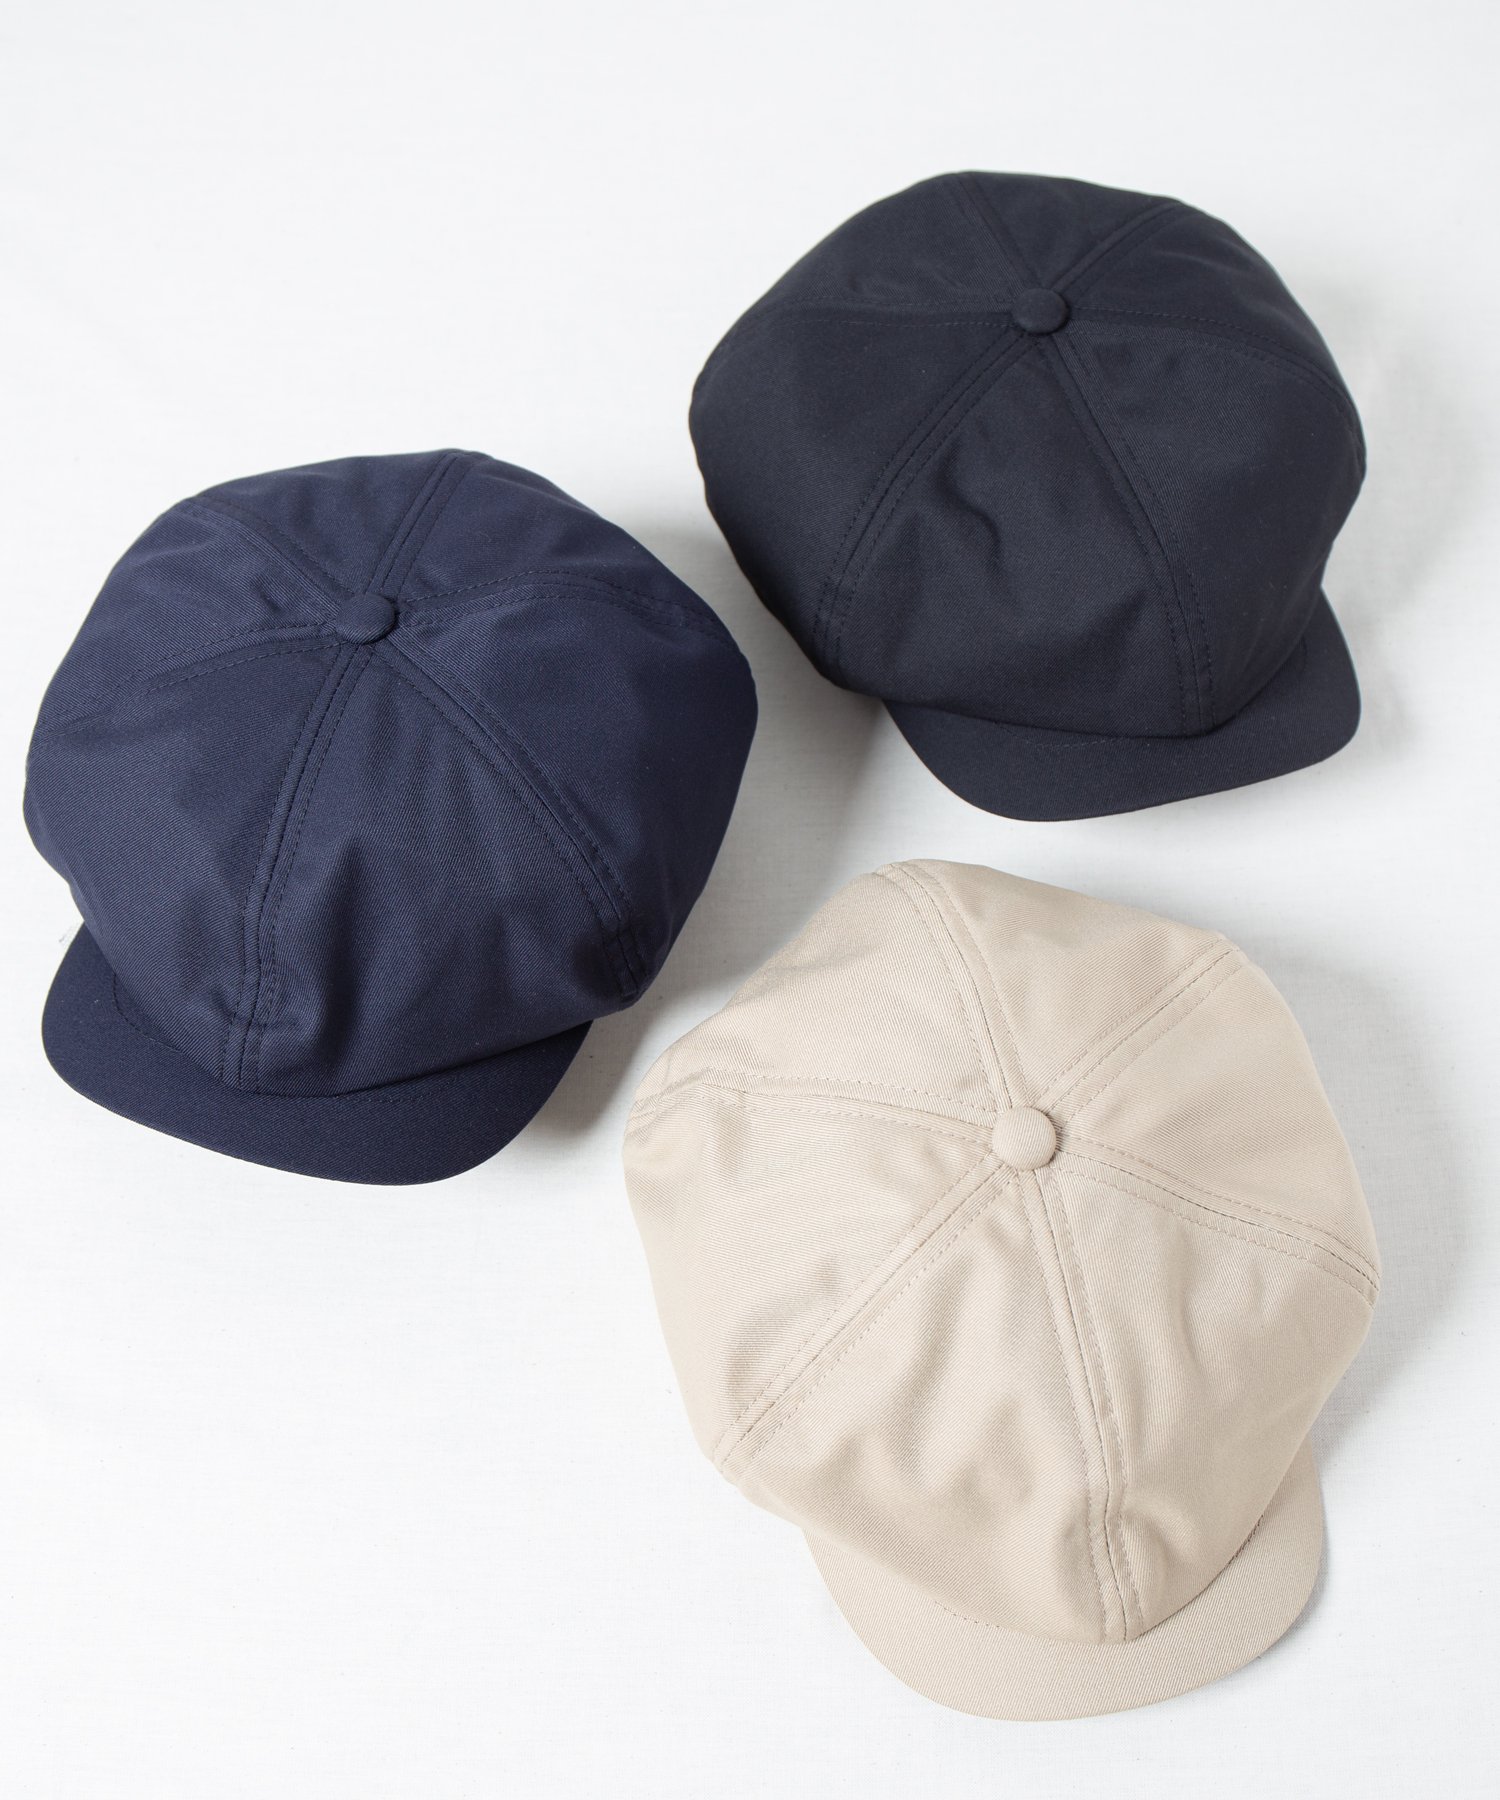 <img class='new_mark_img1' src='https://img.shop-pro.jp/img/new/icons15.gif' style='border:none;display:inline;margin:0px;padding:0px;width:auto;' />【Racal】 Recycle Polyester Blend Twill News Boy Cap / リサイクルポリブレンドツイルニュースボーイキャップ